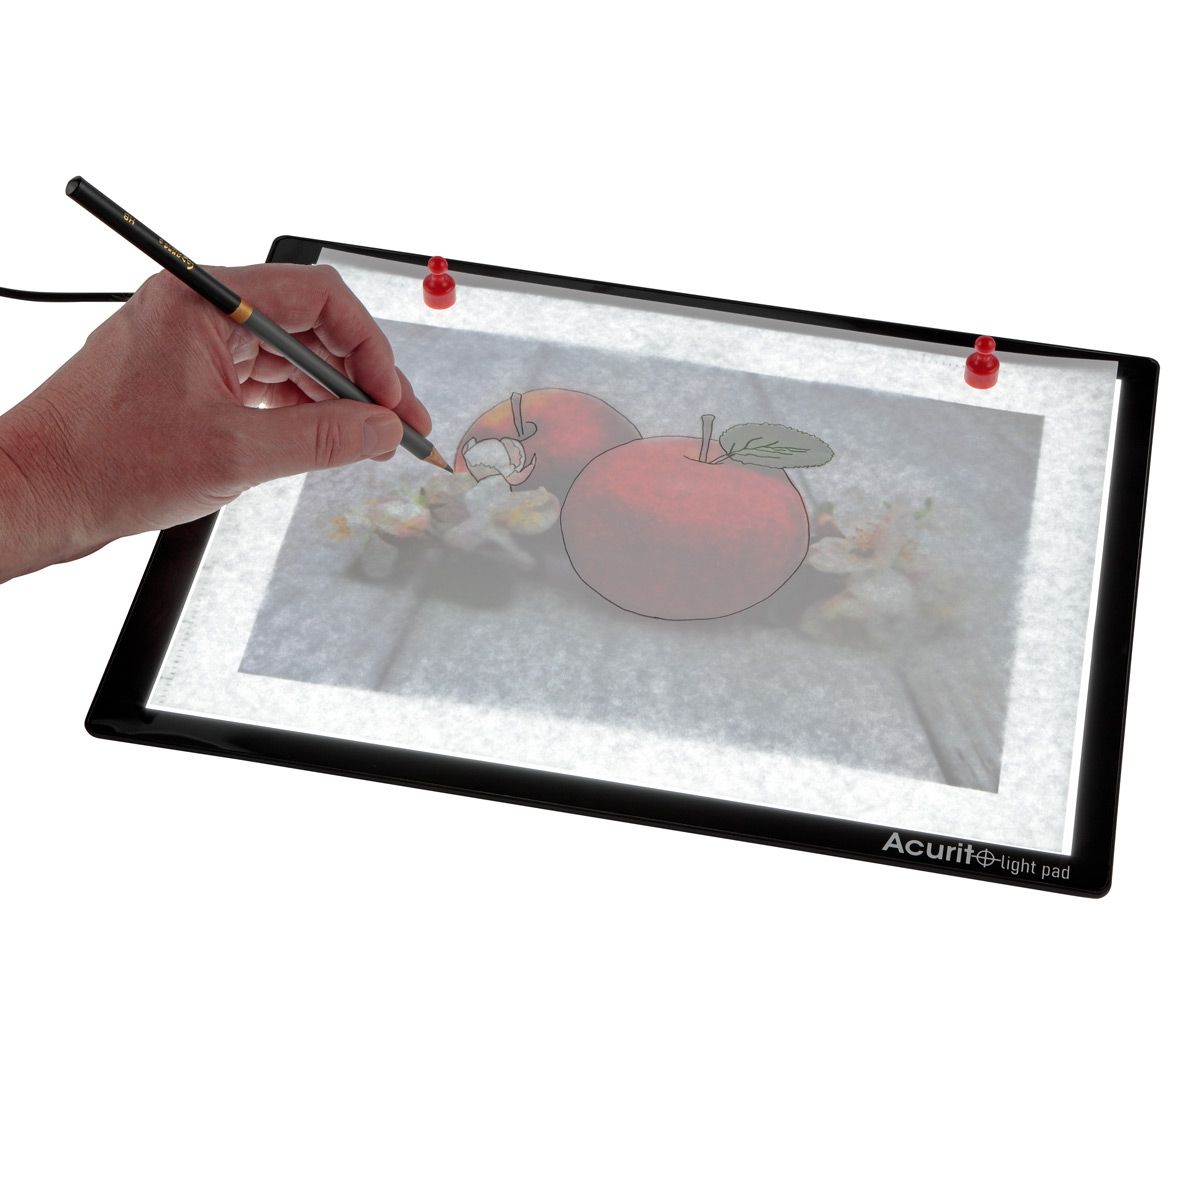 Durable, lightweight, compact, and portable Light Pad